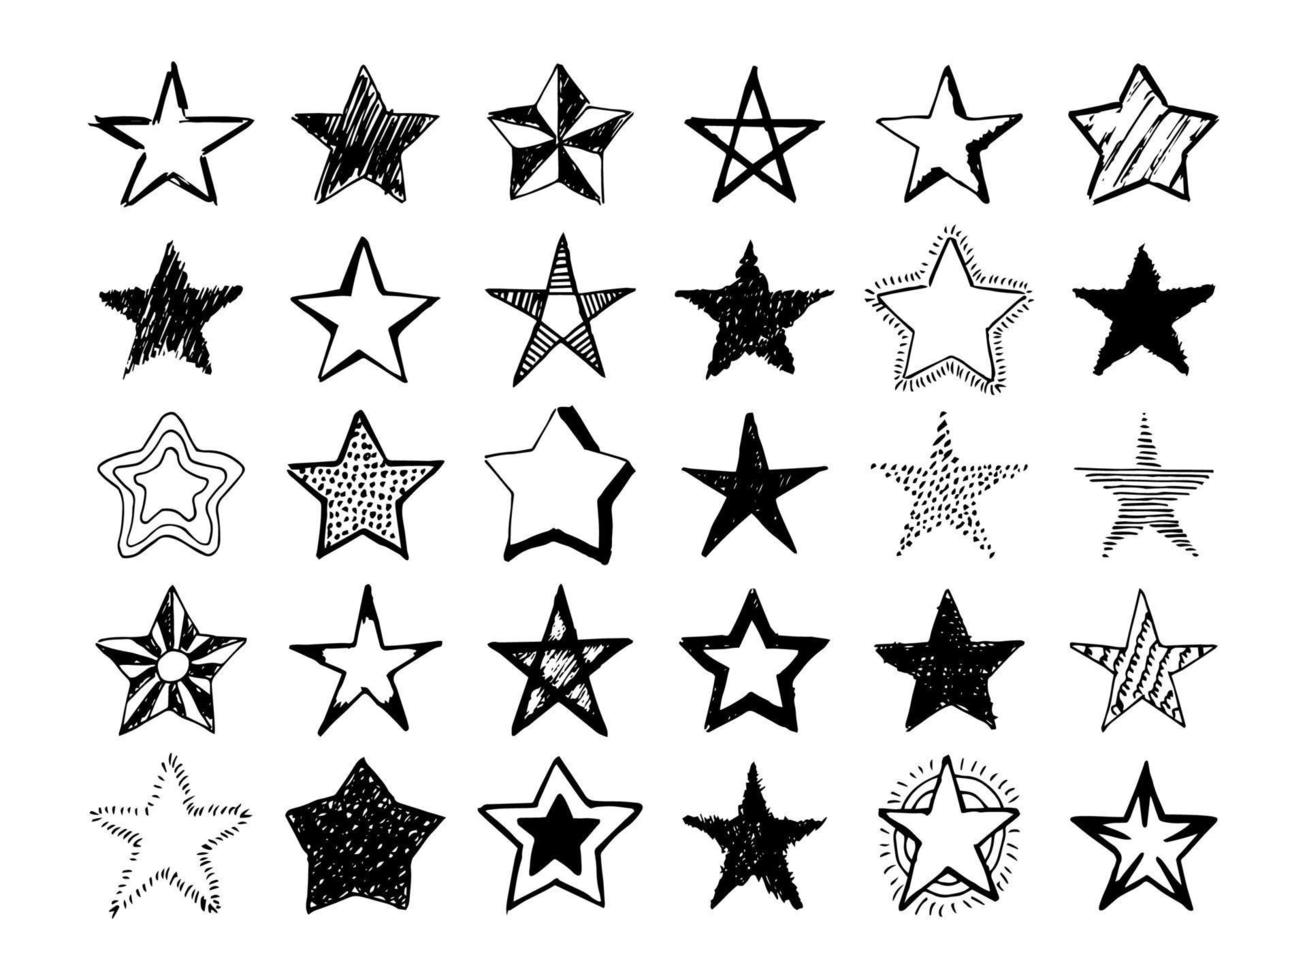 Doodle stars. Set of thirty black hand drawn stars isolated on white background. Vector illustration